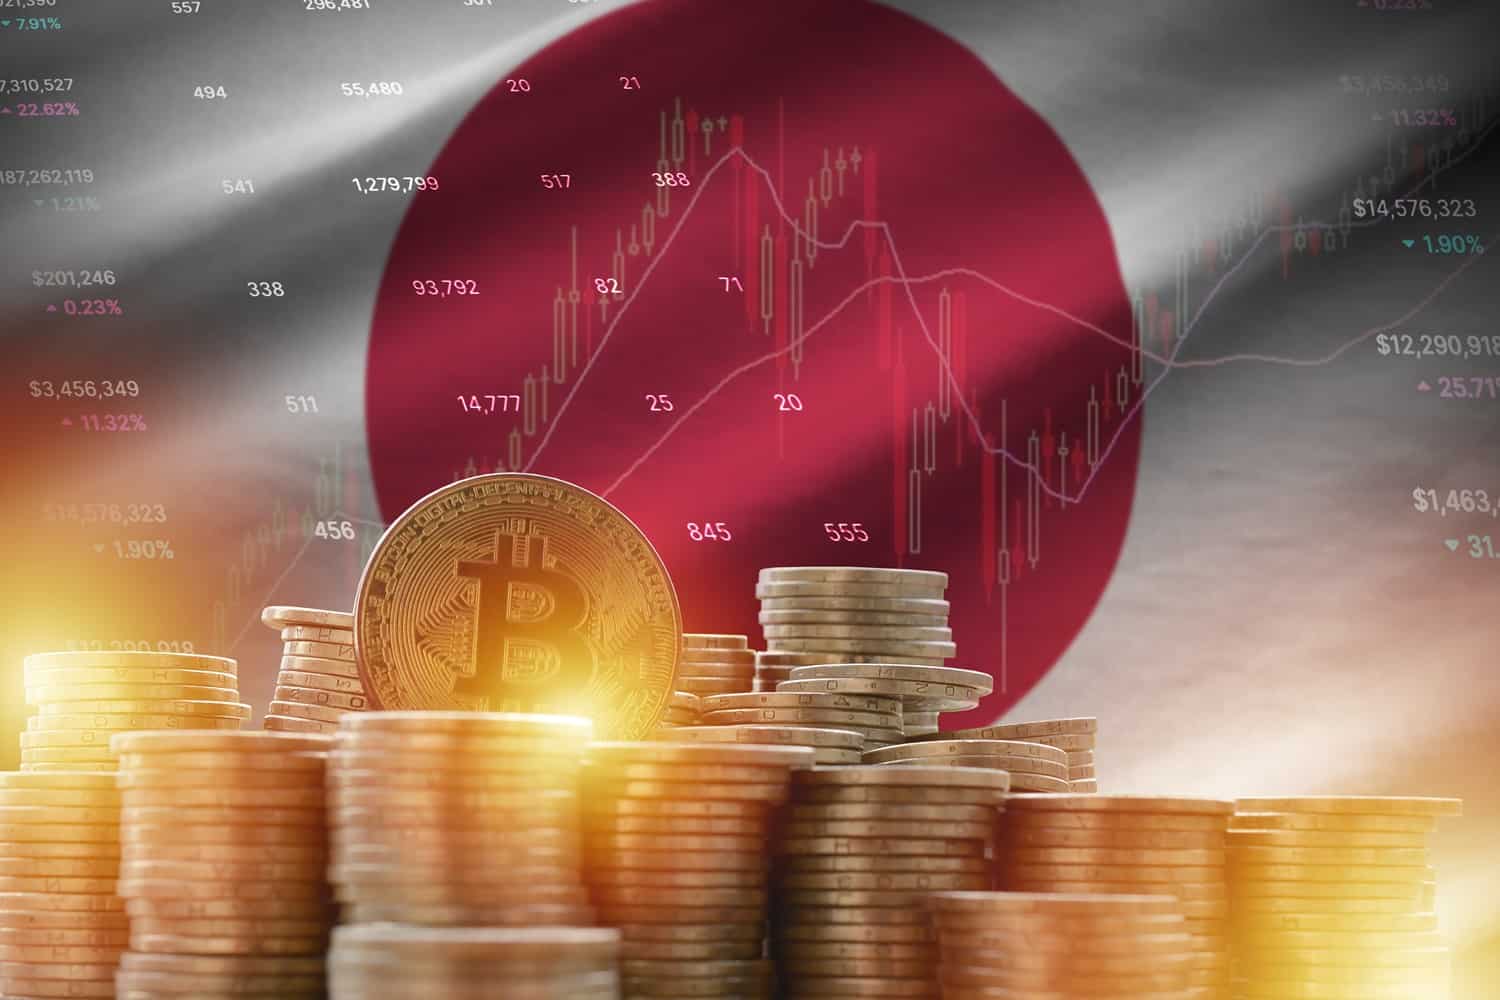 The Japanese flag and a large pile of golden coins intended to represent Bitcoin against the background of a trading platform chart.